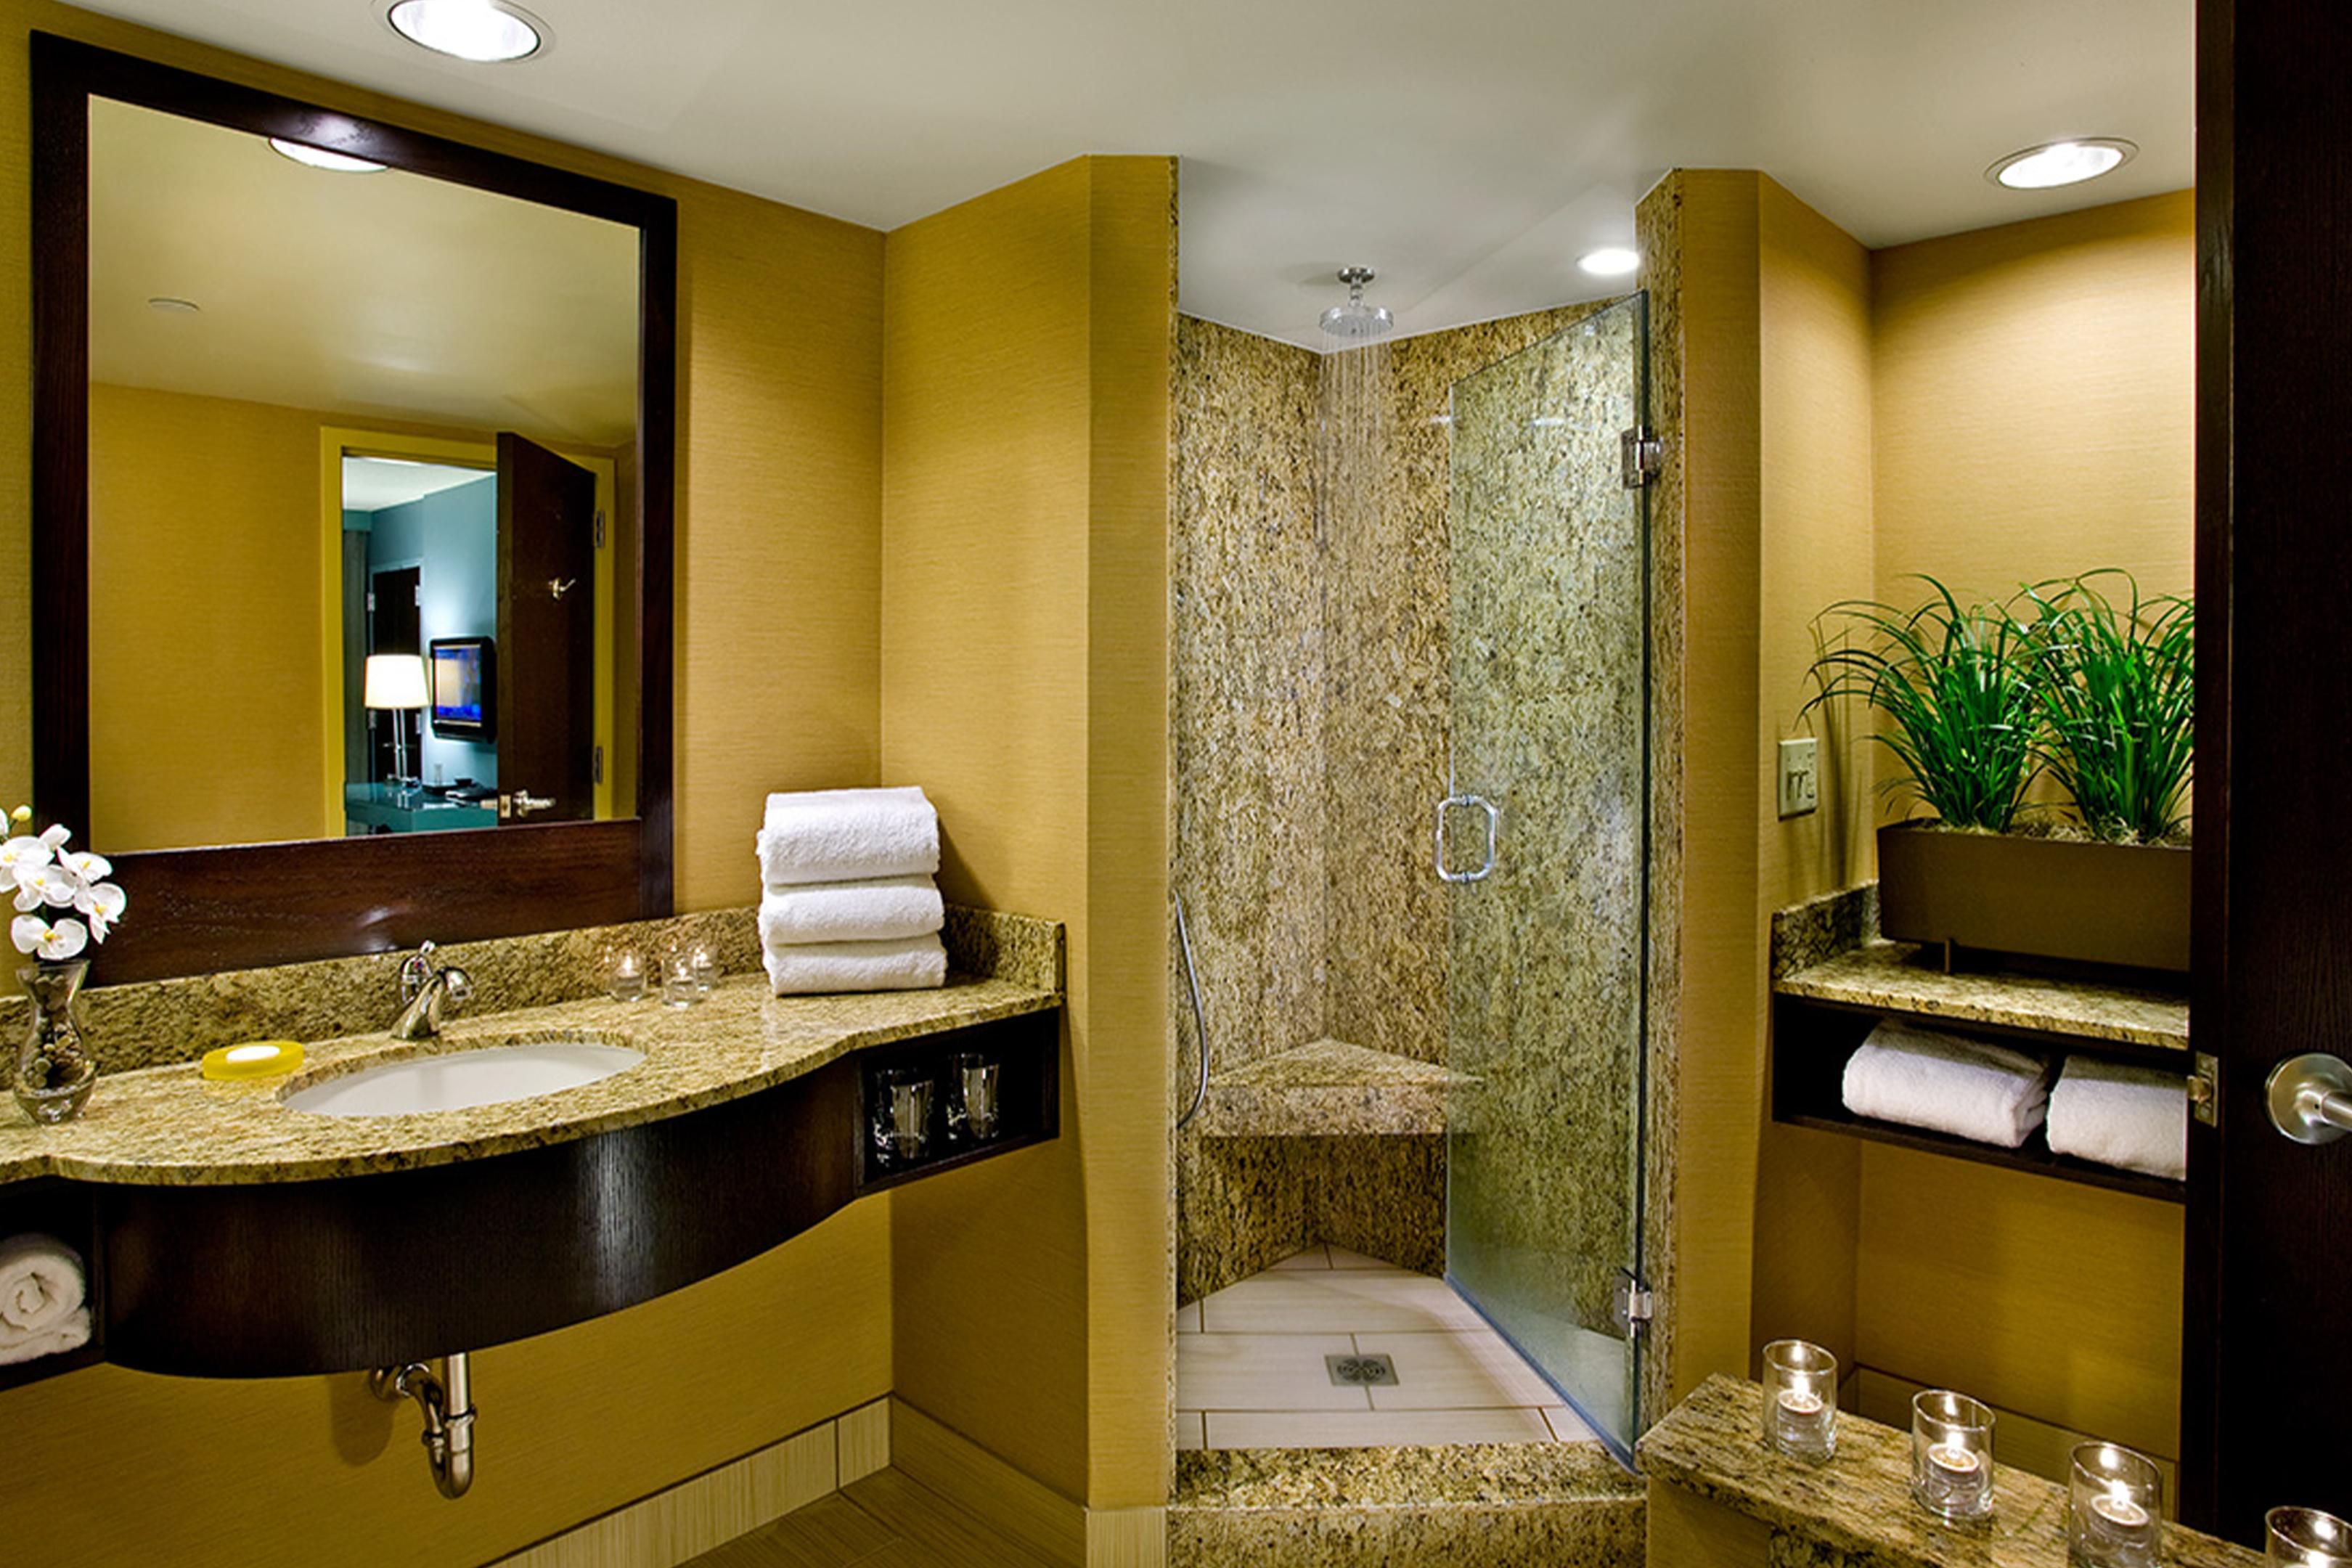 Spacious suite bathrooms to recharge after a long day.